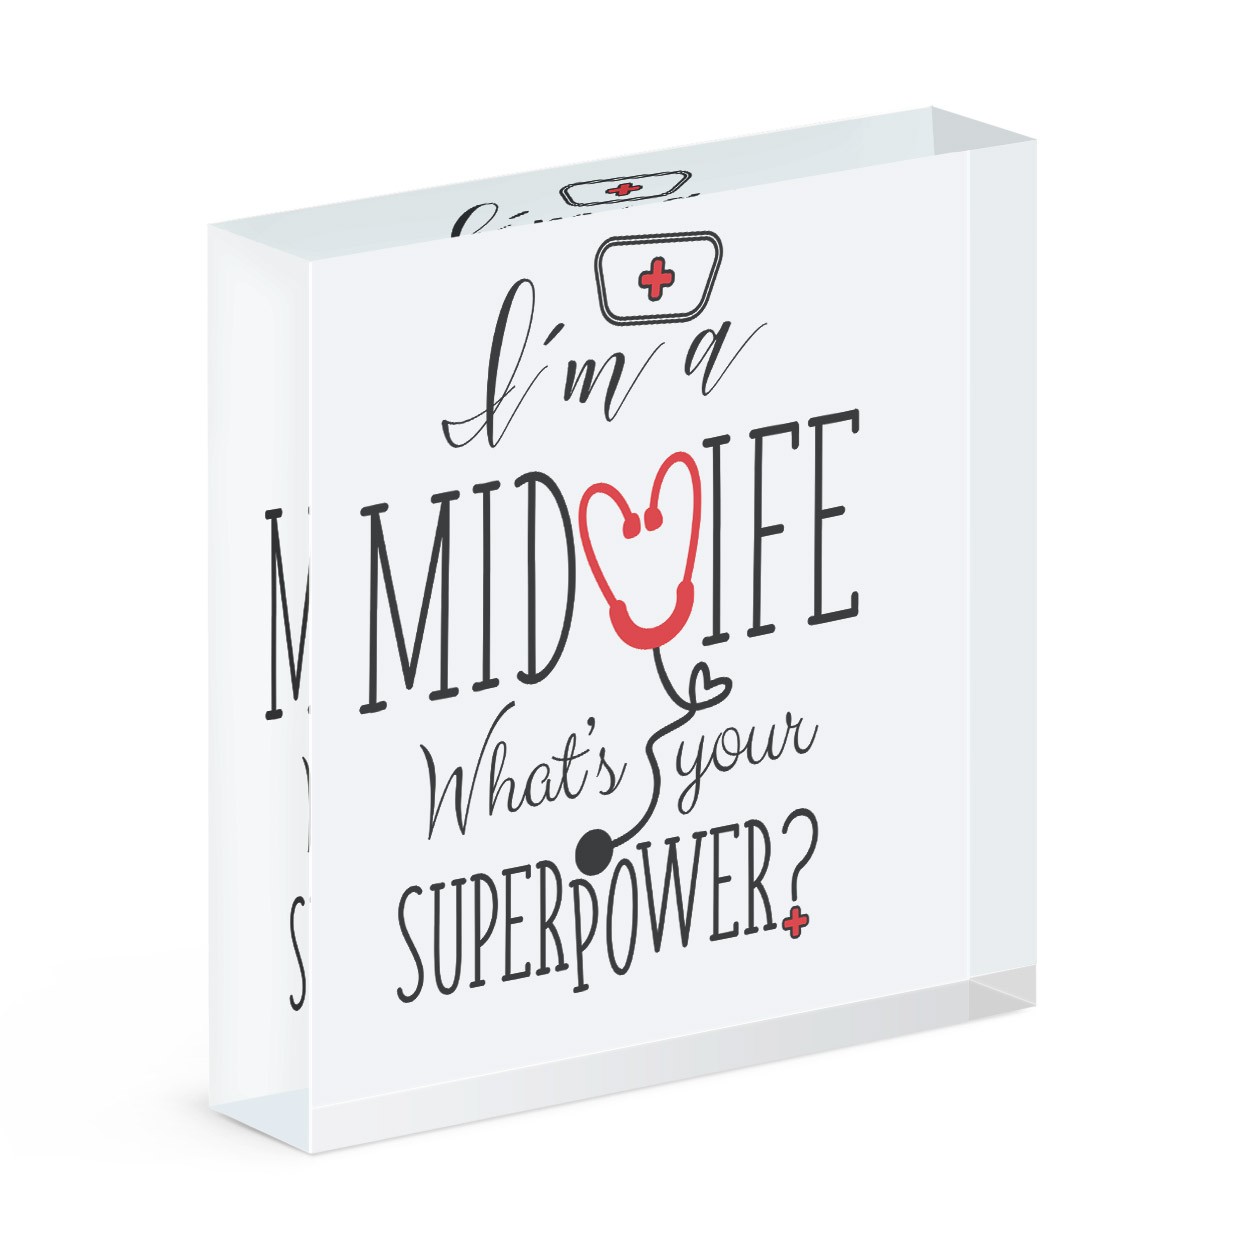 I'm A Midwife What's Your Superpower Acrylic Block